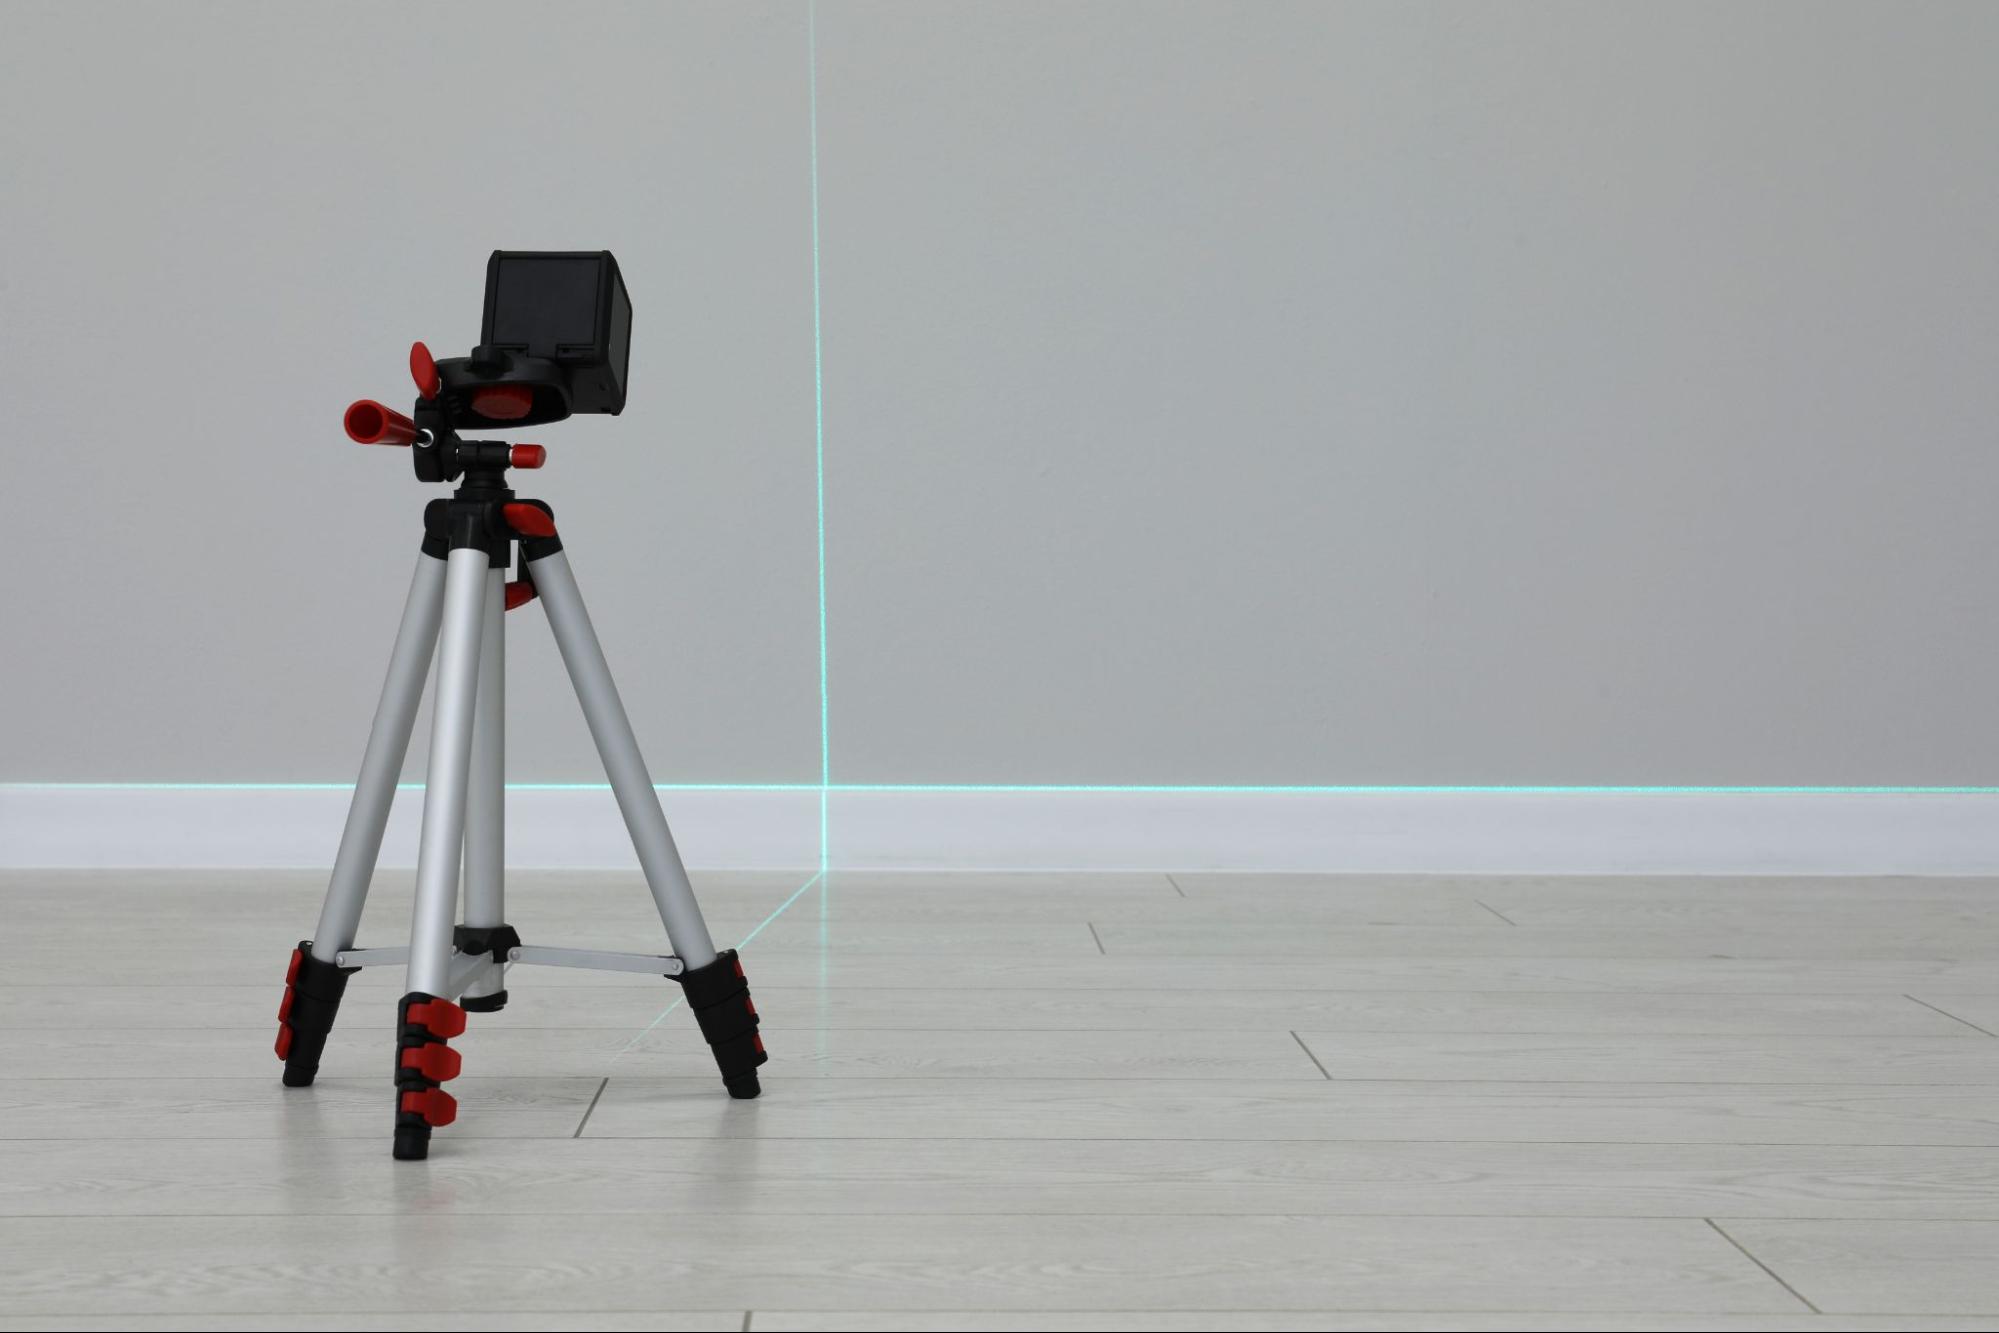 Image of a tripod with level lines against the wall and floor